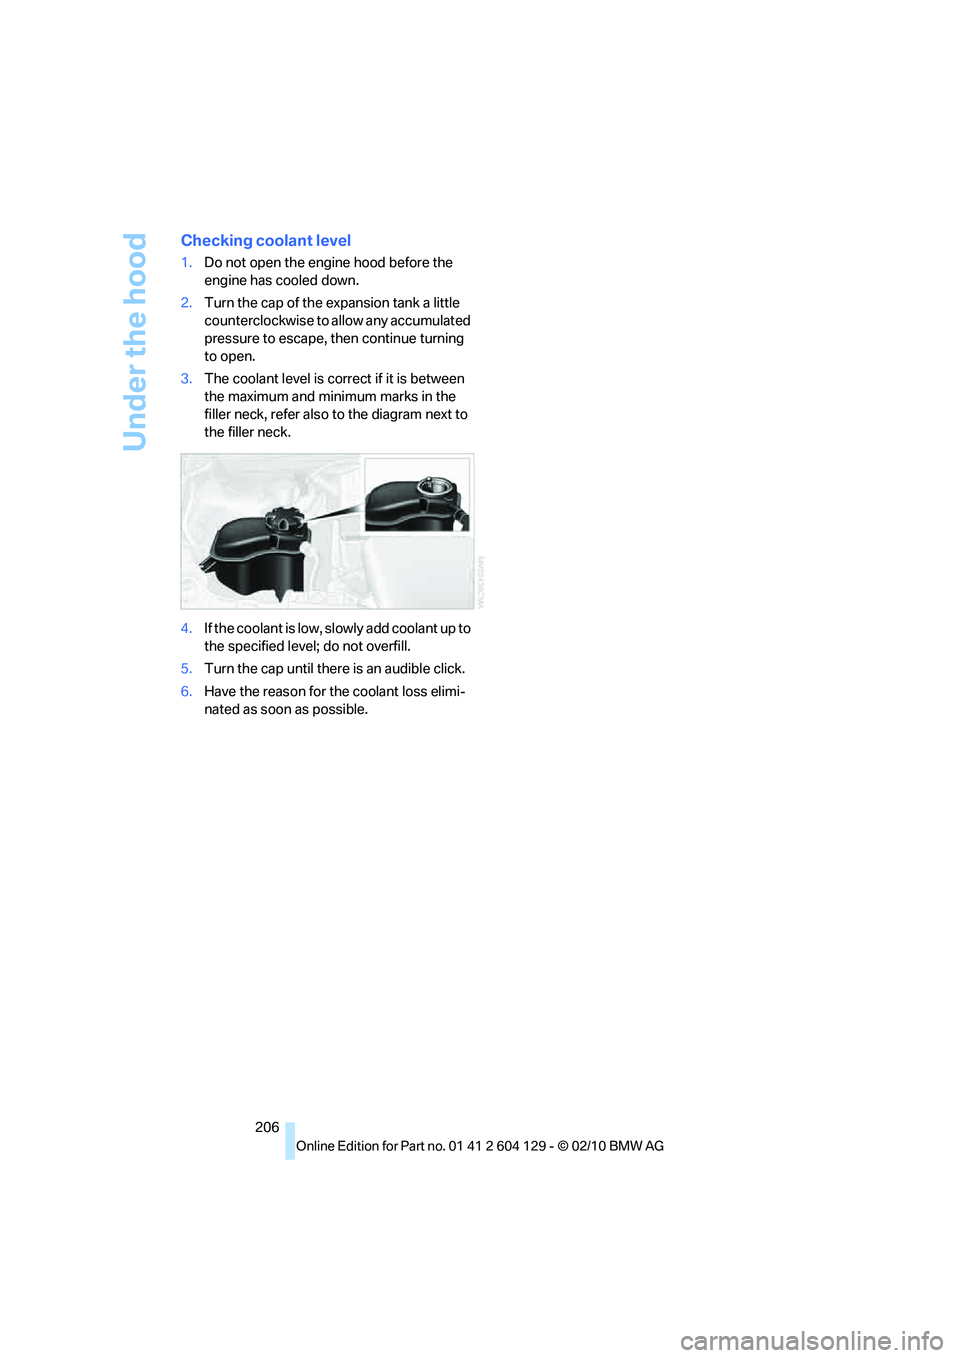 BMW 1 SERIES 2011  Owners Manual Under the hood
206
Checking coolant level
1.Do not open the engine hood before the 
engine has cooled down.
2.Turn the cap of the expansion tank a little 
counterclockwise to allow any accumulated 
pr